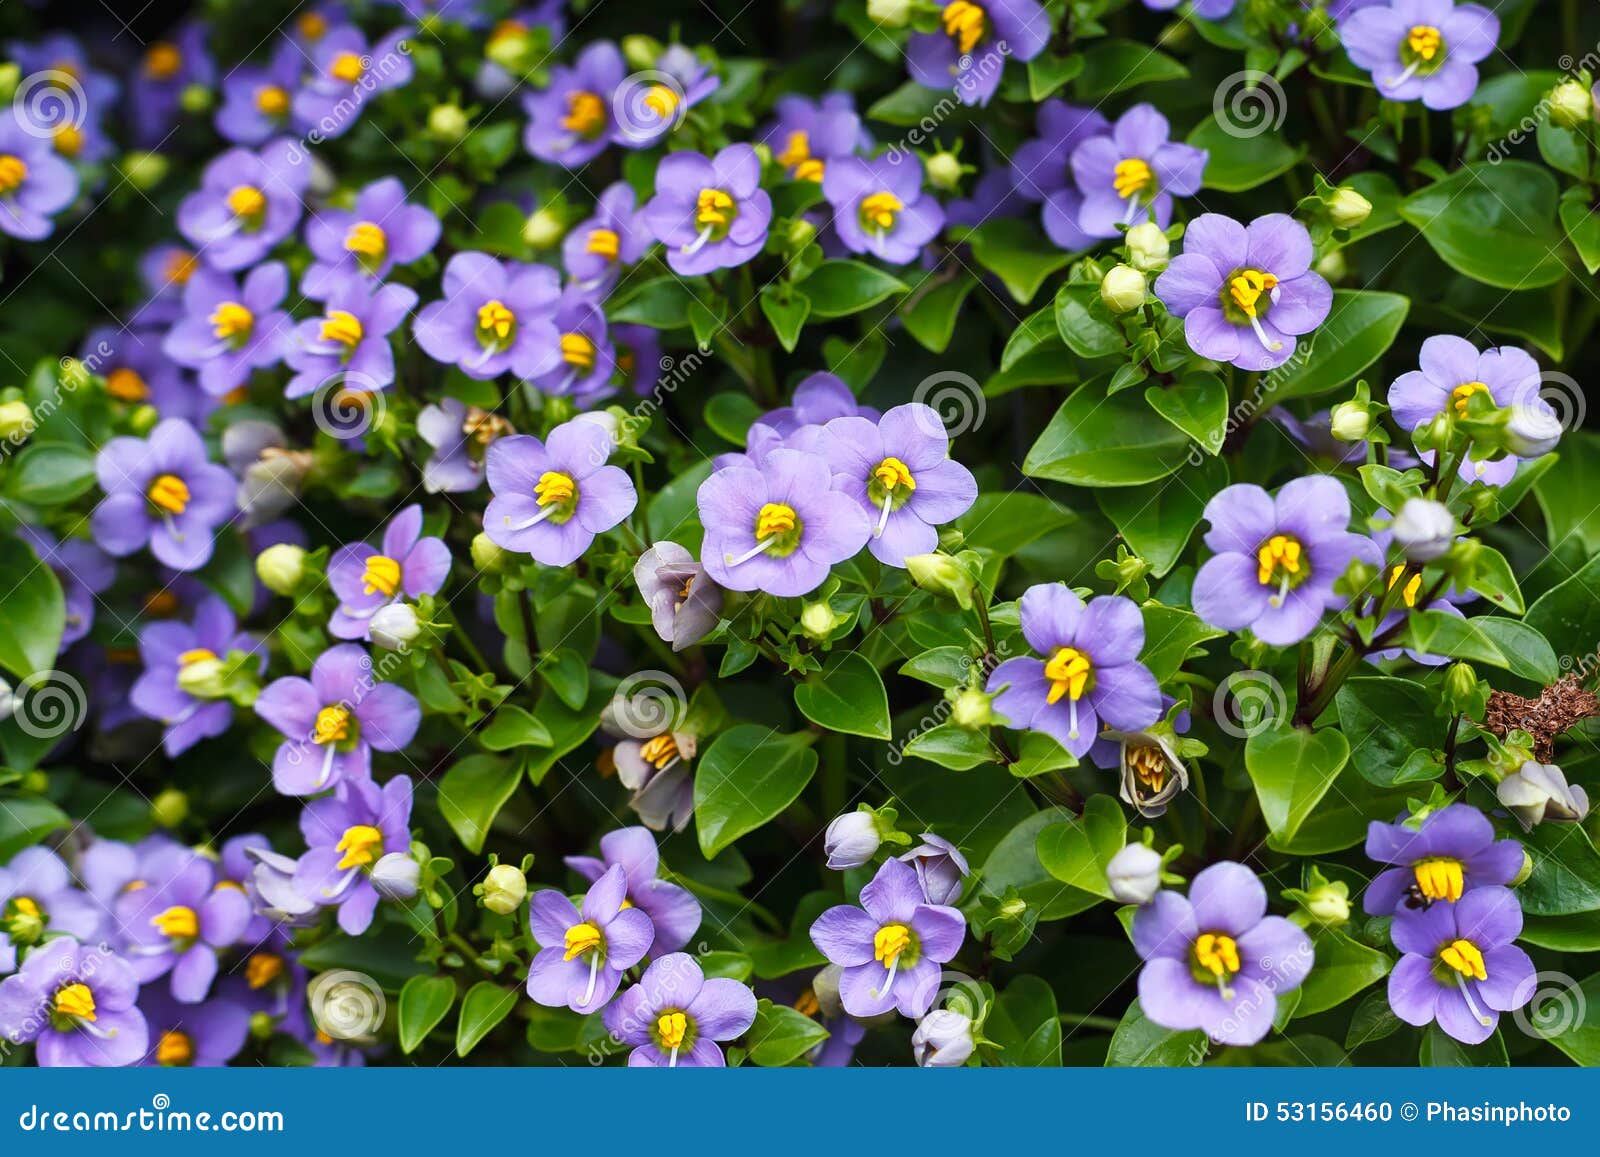 flower background texture beautiful persian violet